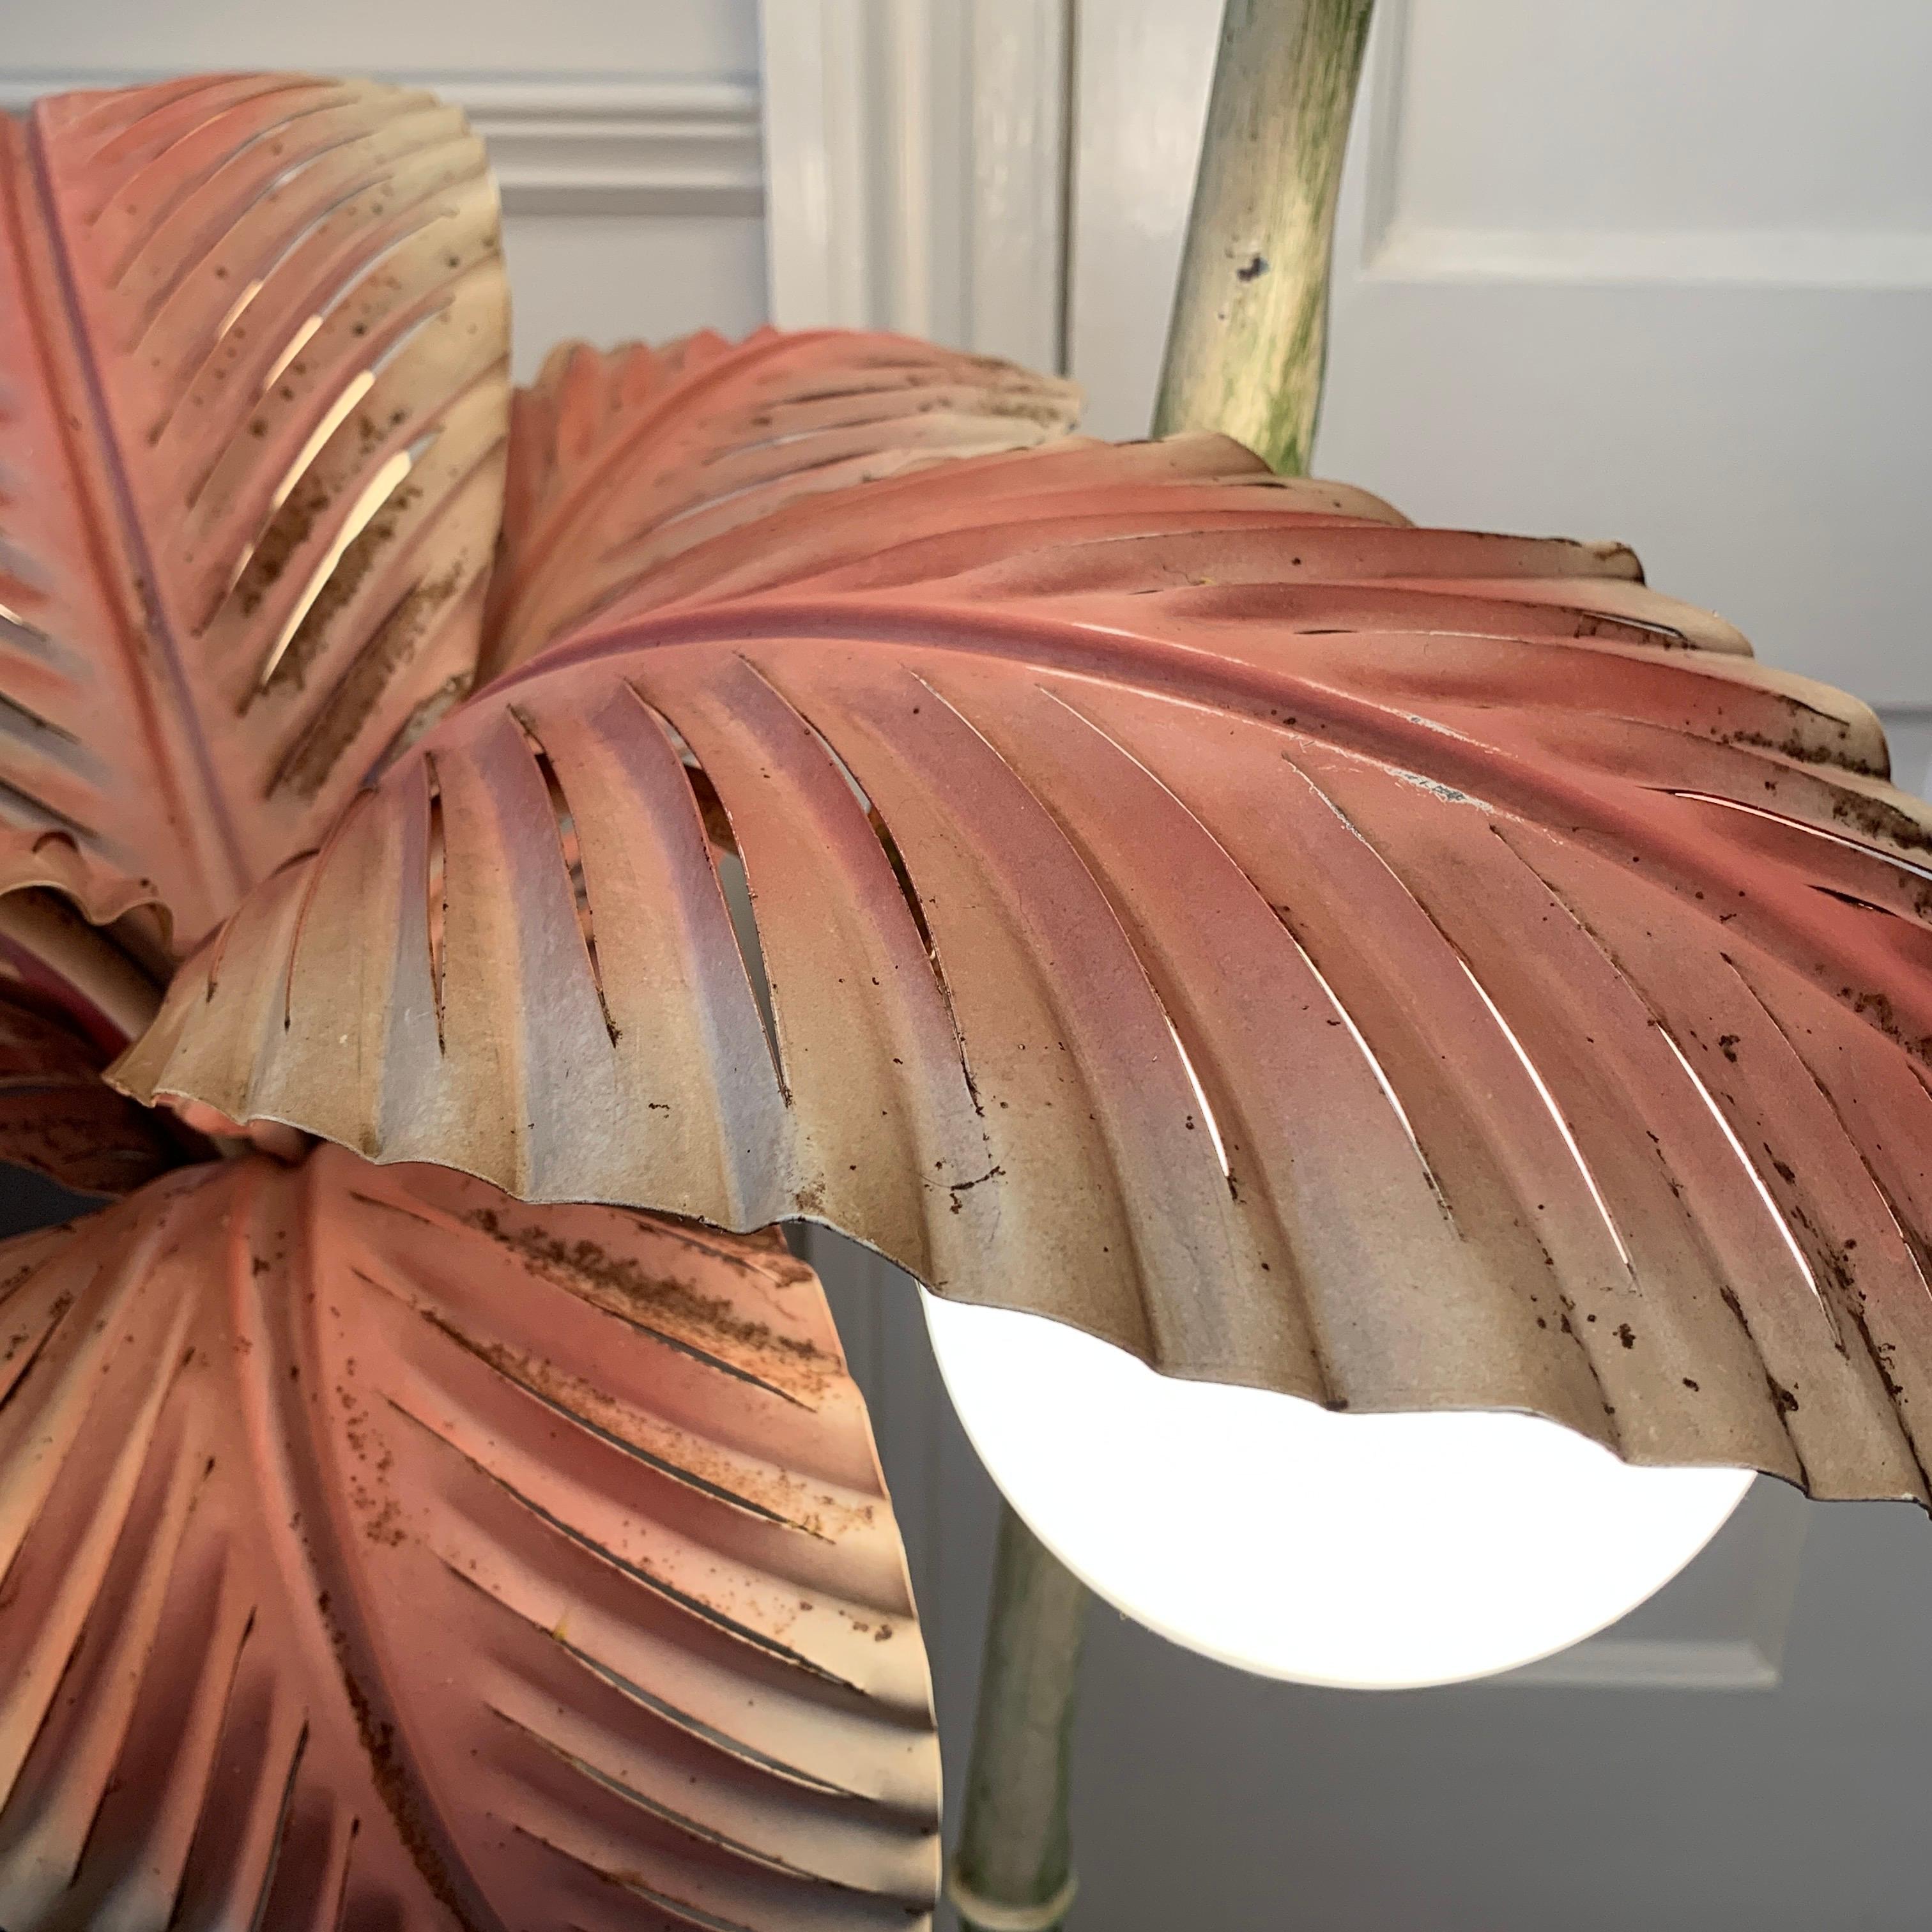 Absolutely breathtaking Palm Tree floor lamp, designed by Sergio Terzani in the 1970's. This huge scale lamp is in one of the rarest and most desirable rosa e verde (pink and green) naturalistic finishes, the sweeping, serrated large leaves of each